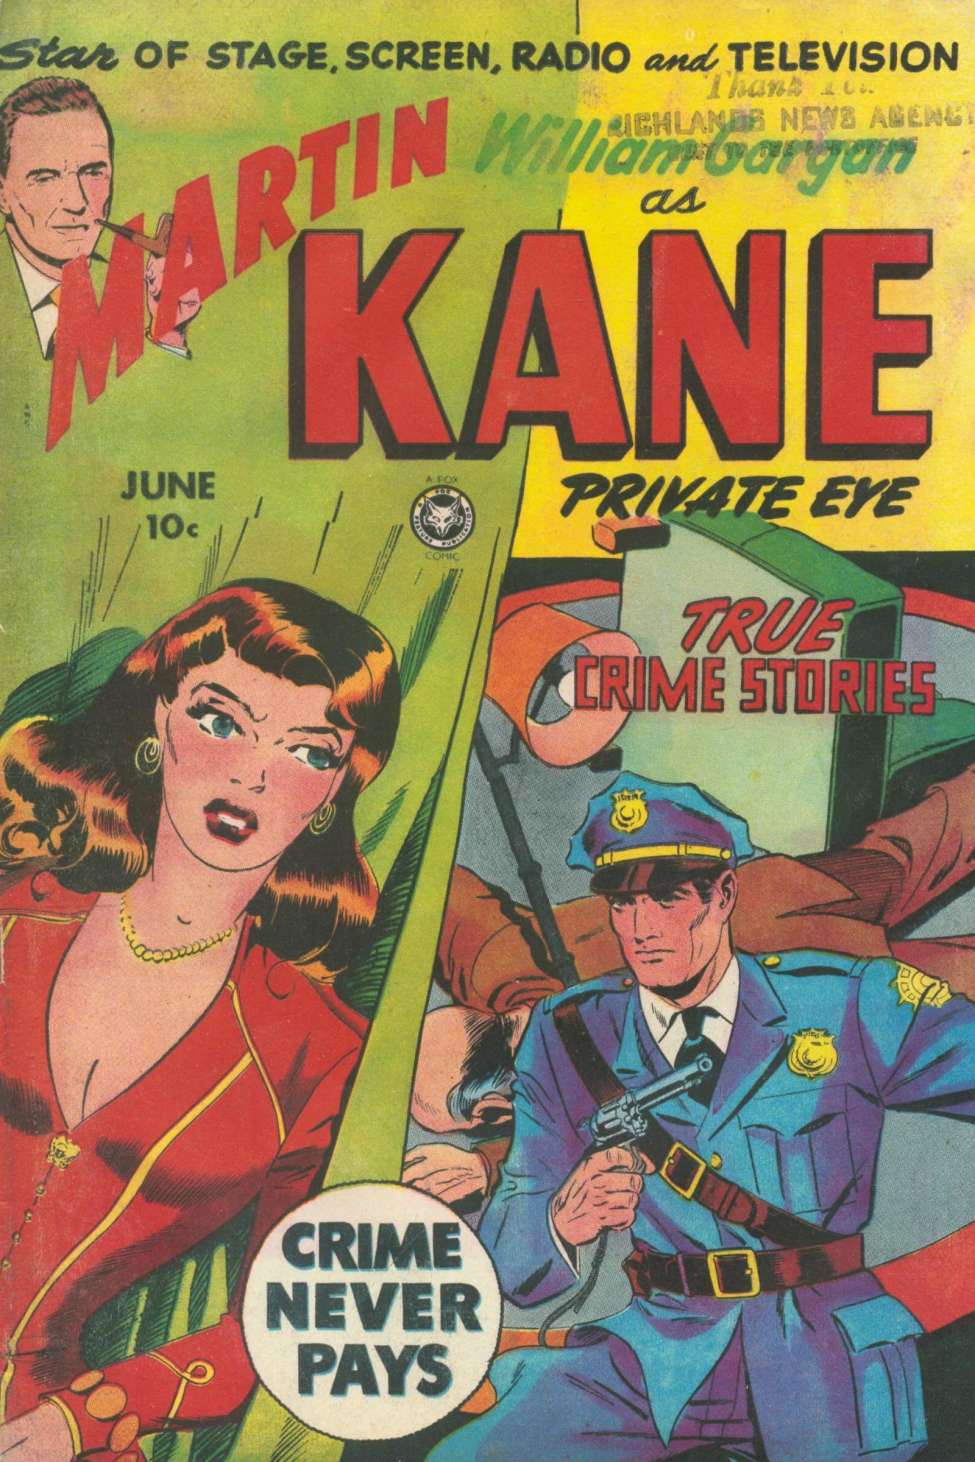 Comic Book Cover For Martin Kane Private Eye 4